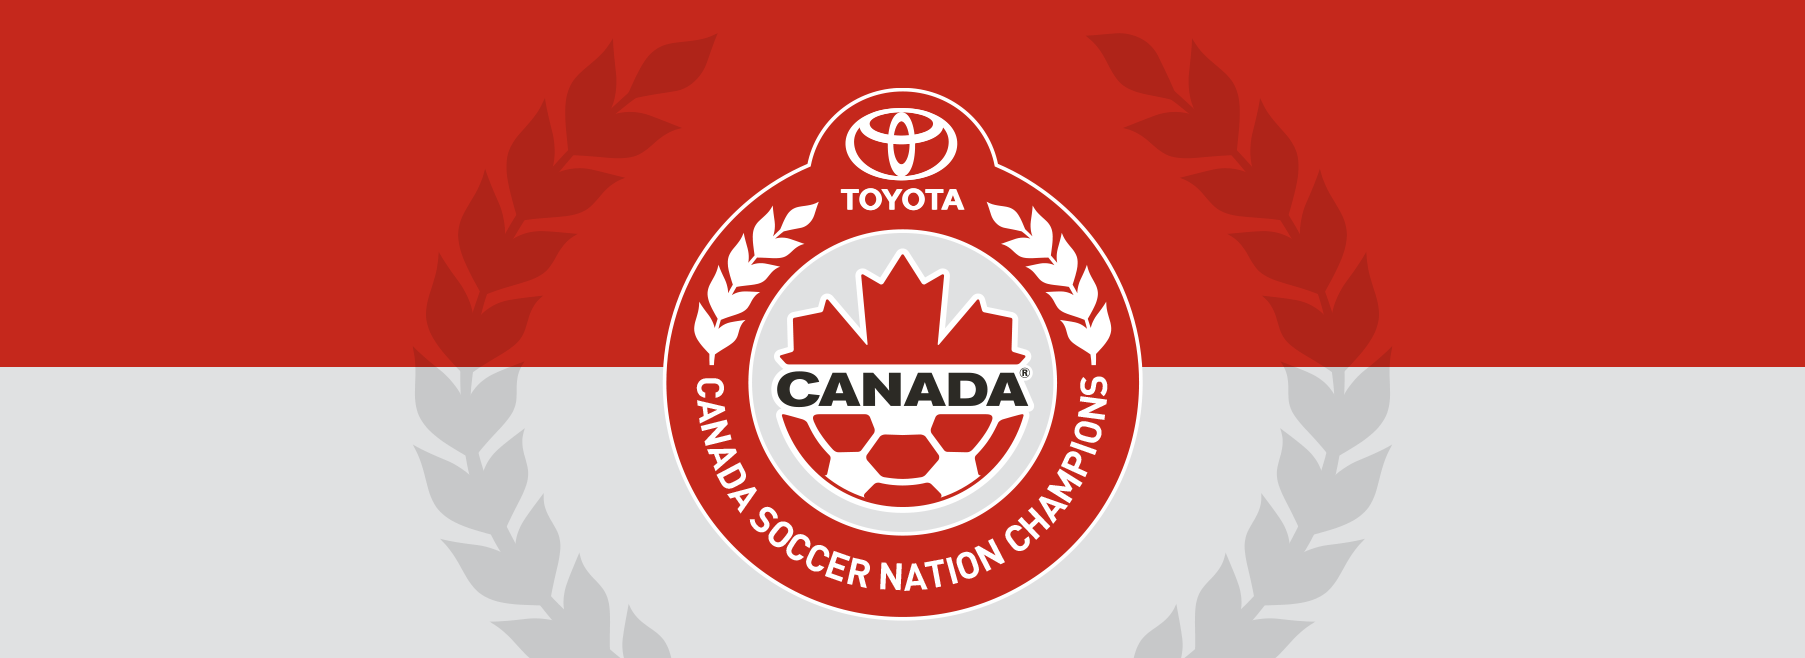 Canada Soccer Nation Champions